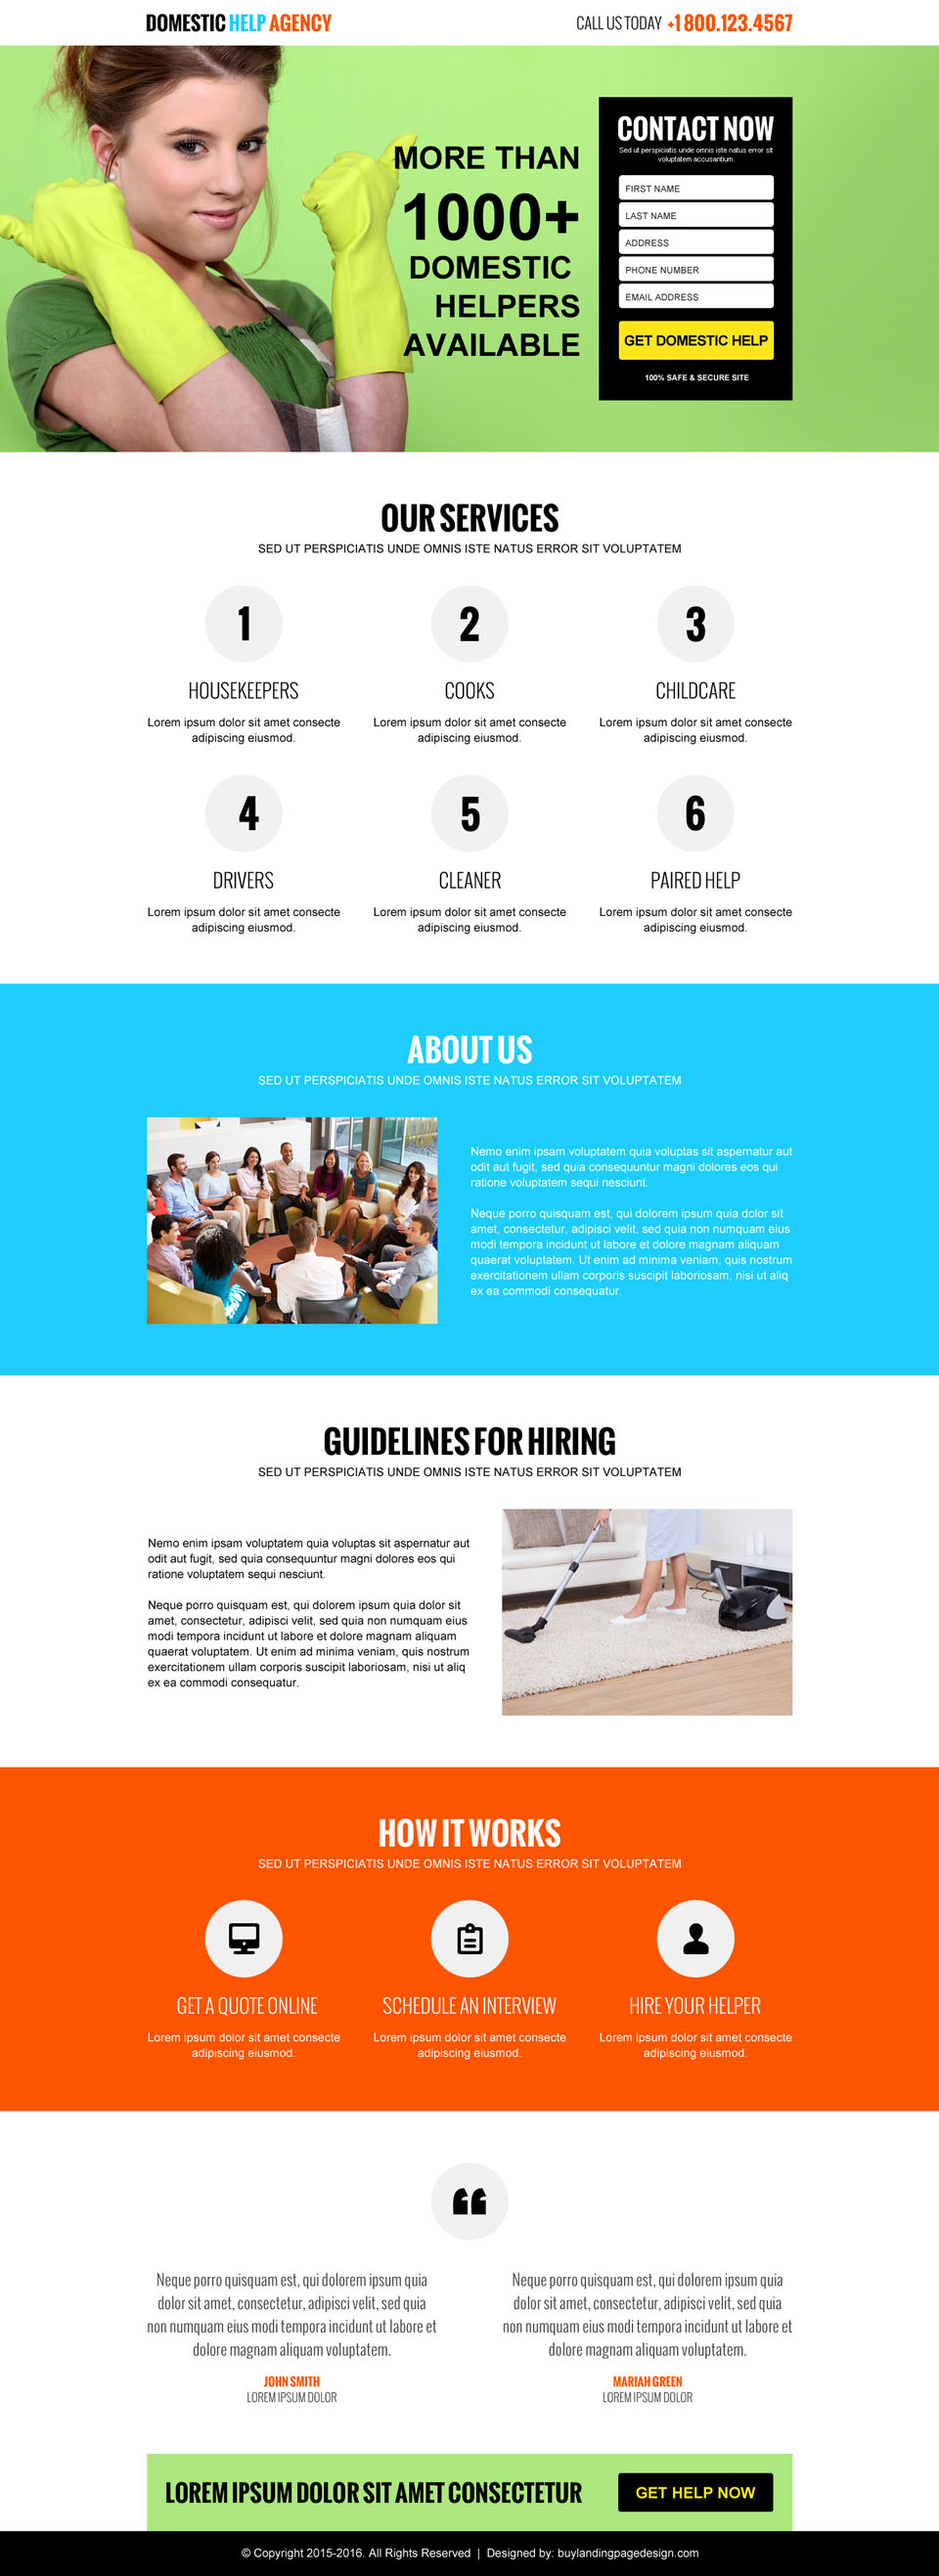 domestic-help-agency-lead-capture-responsive-landing-page-design-template-001